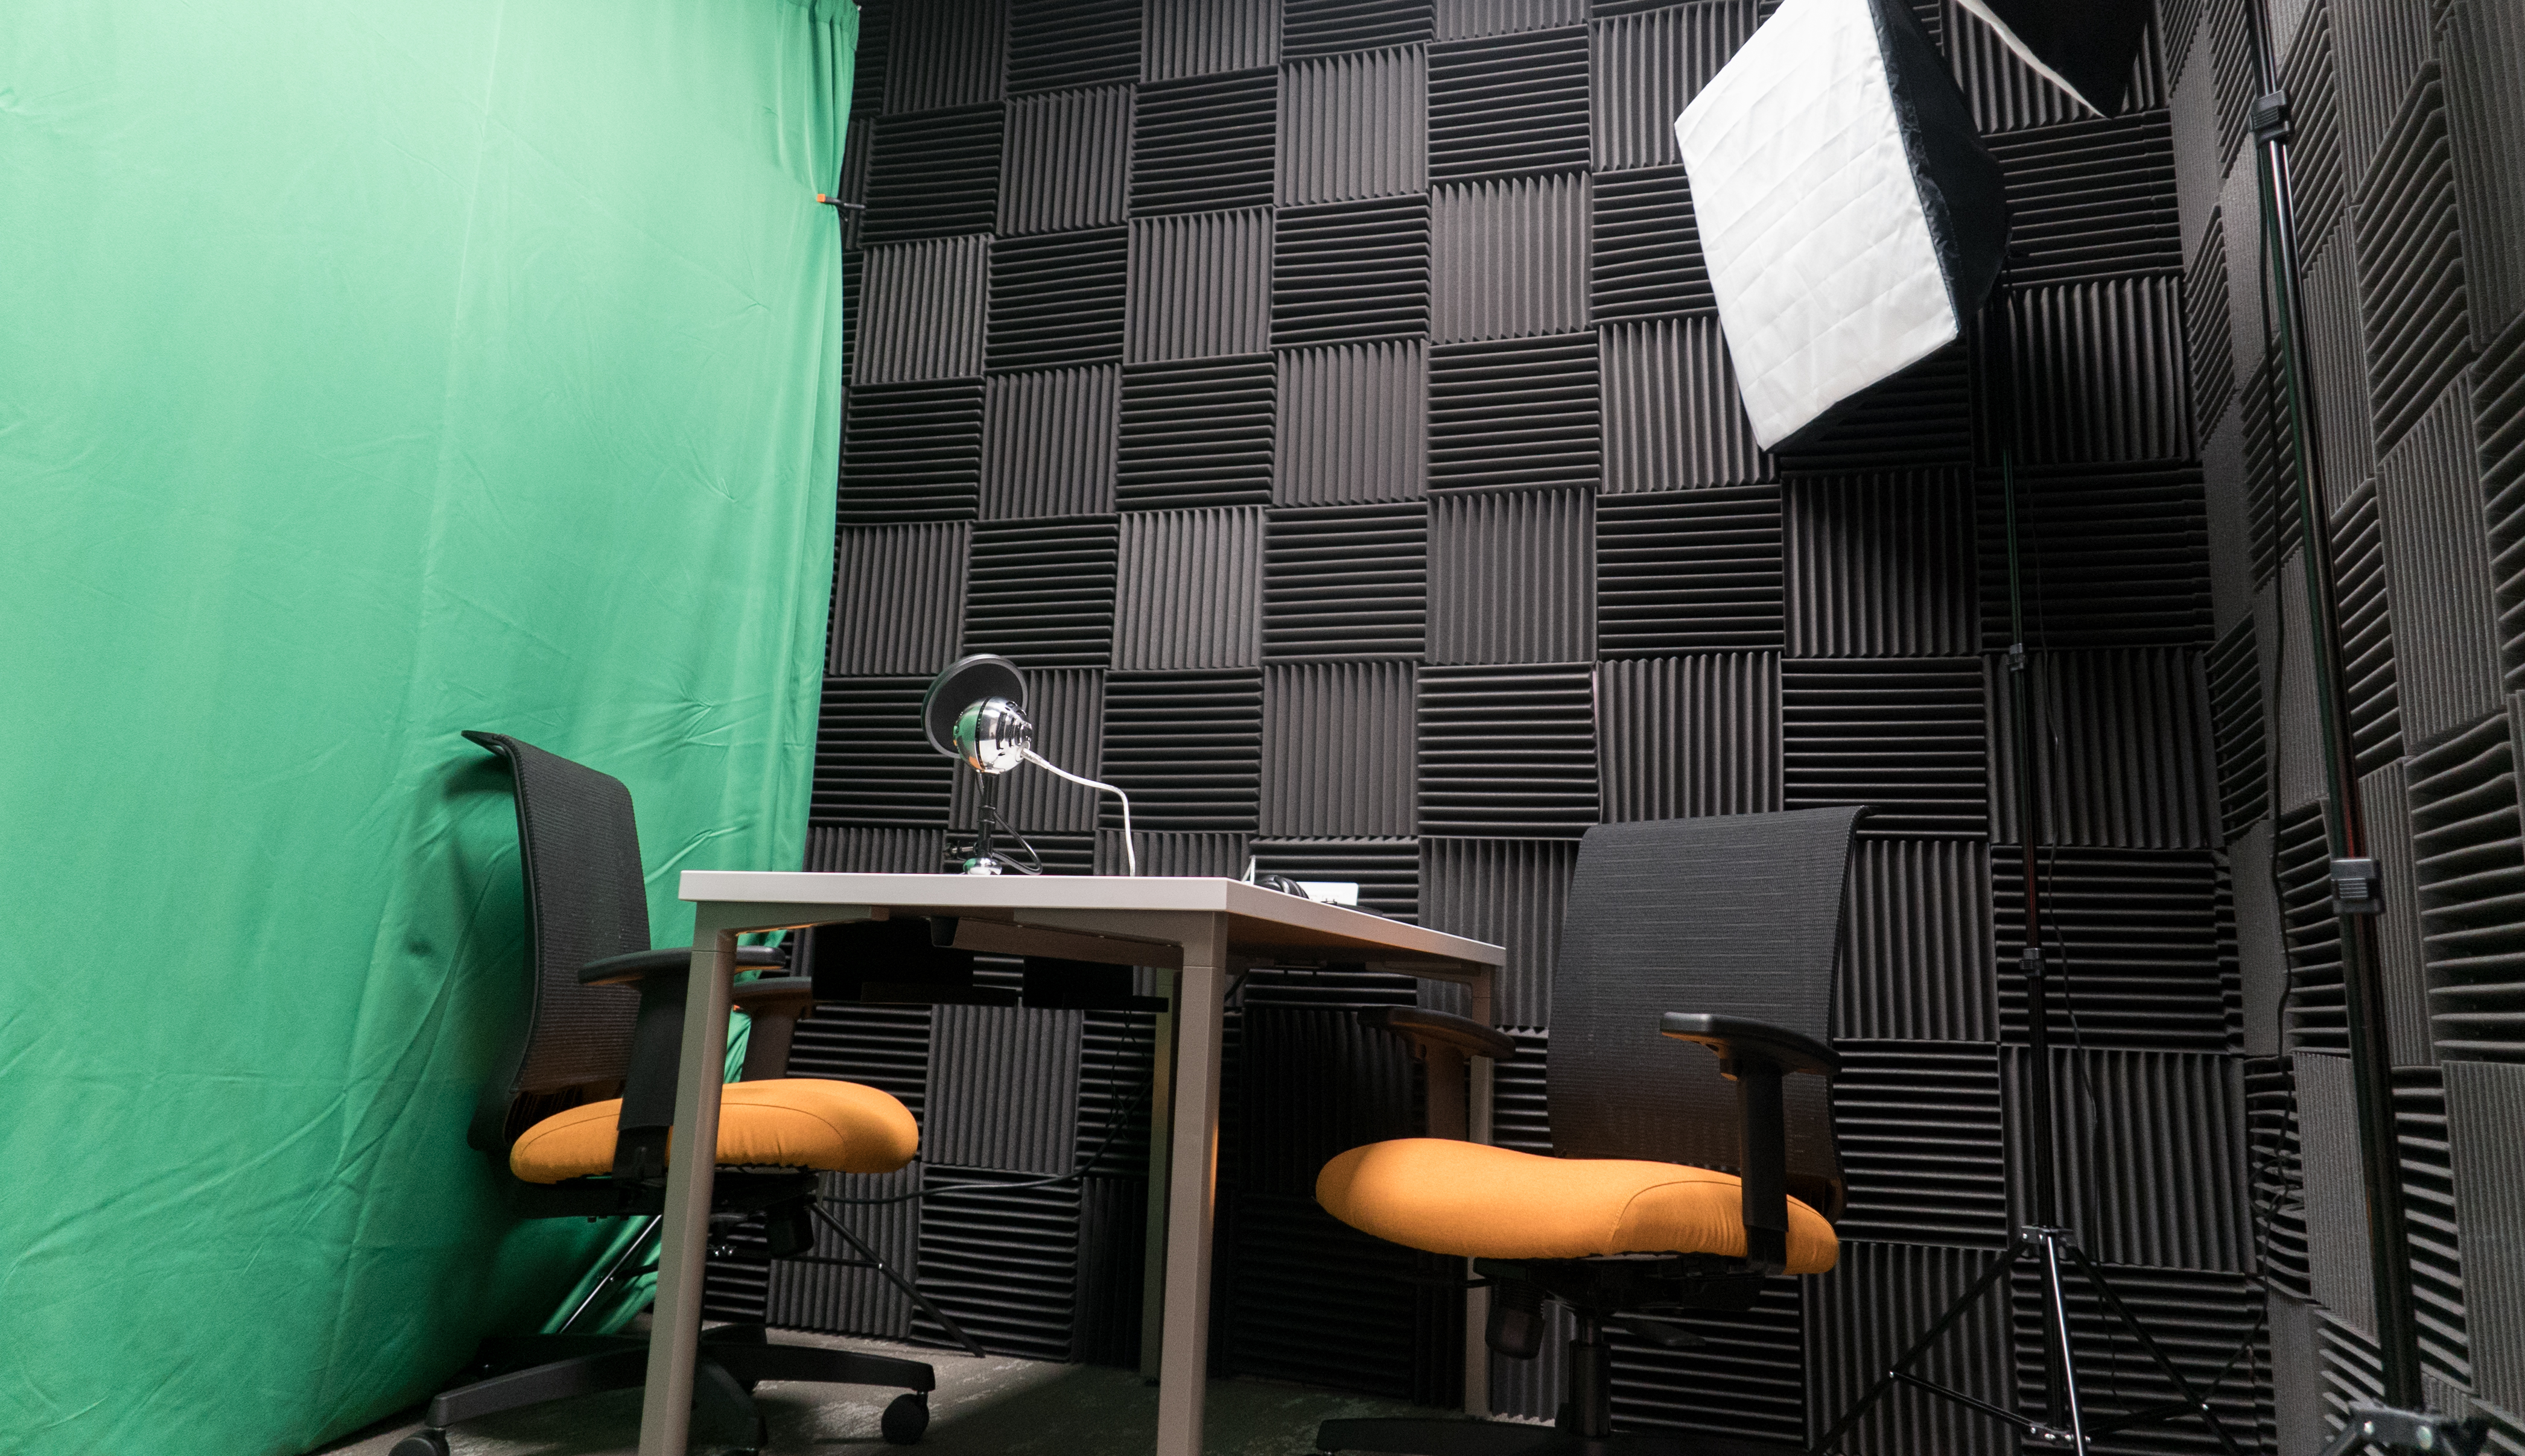 podcast maker space